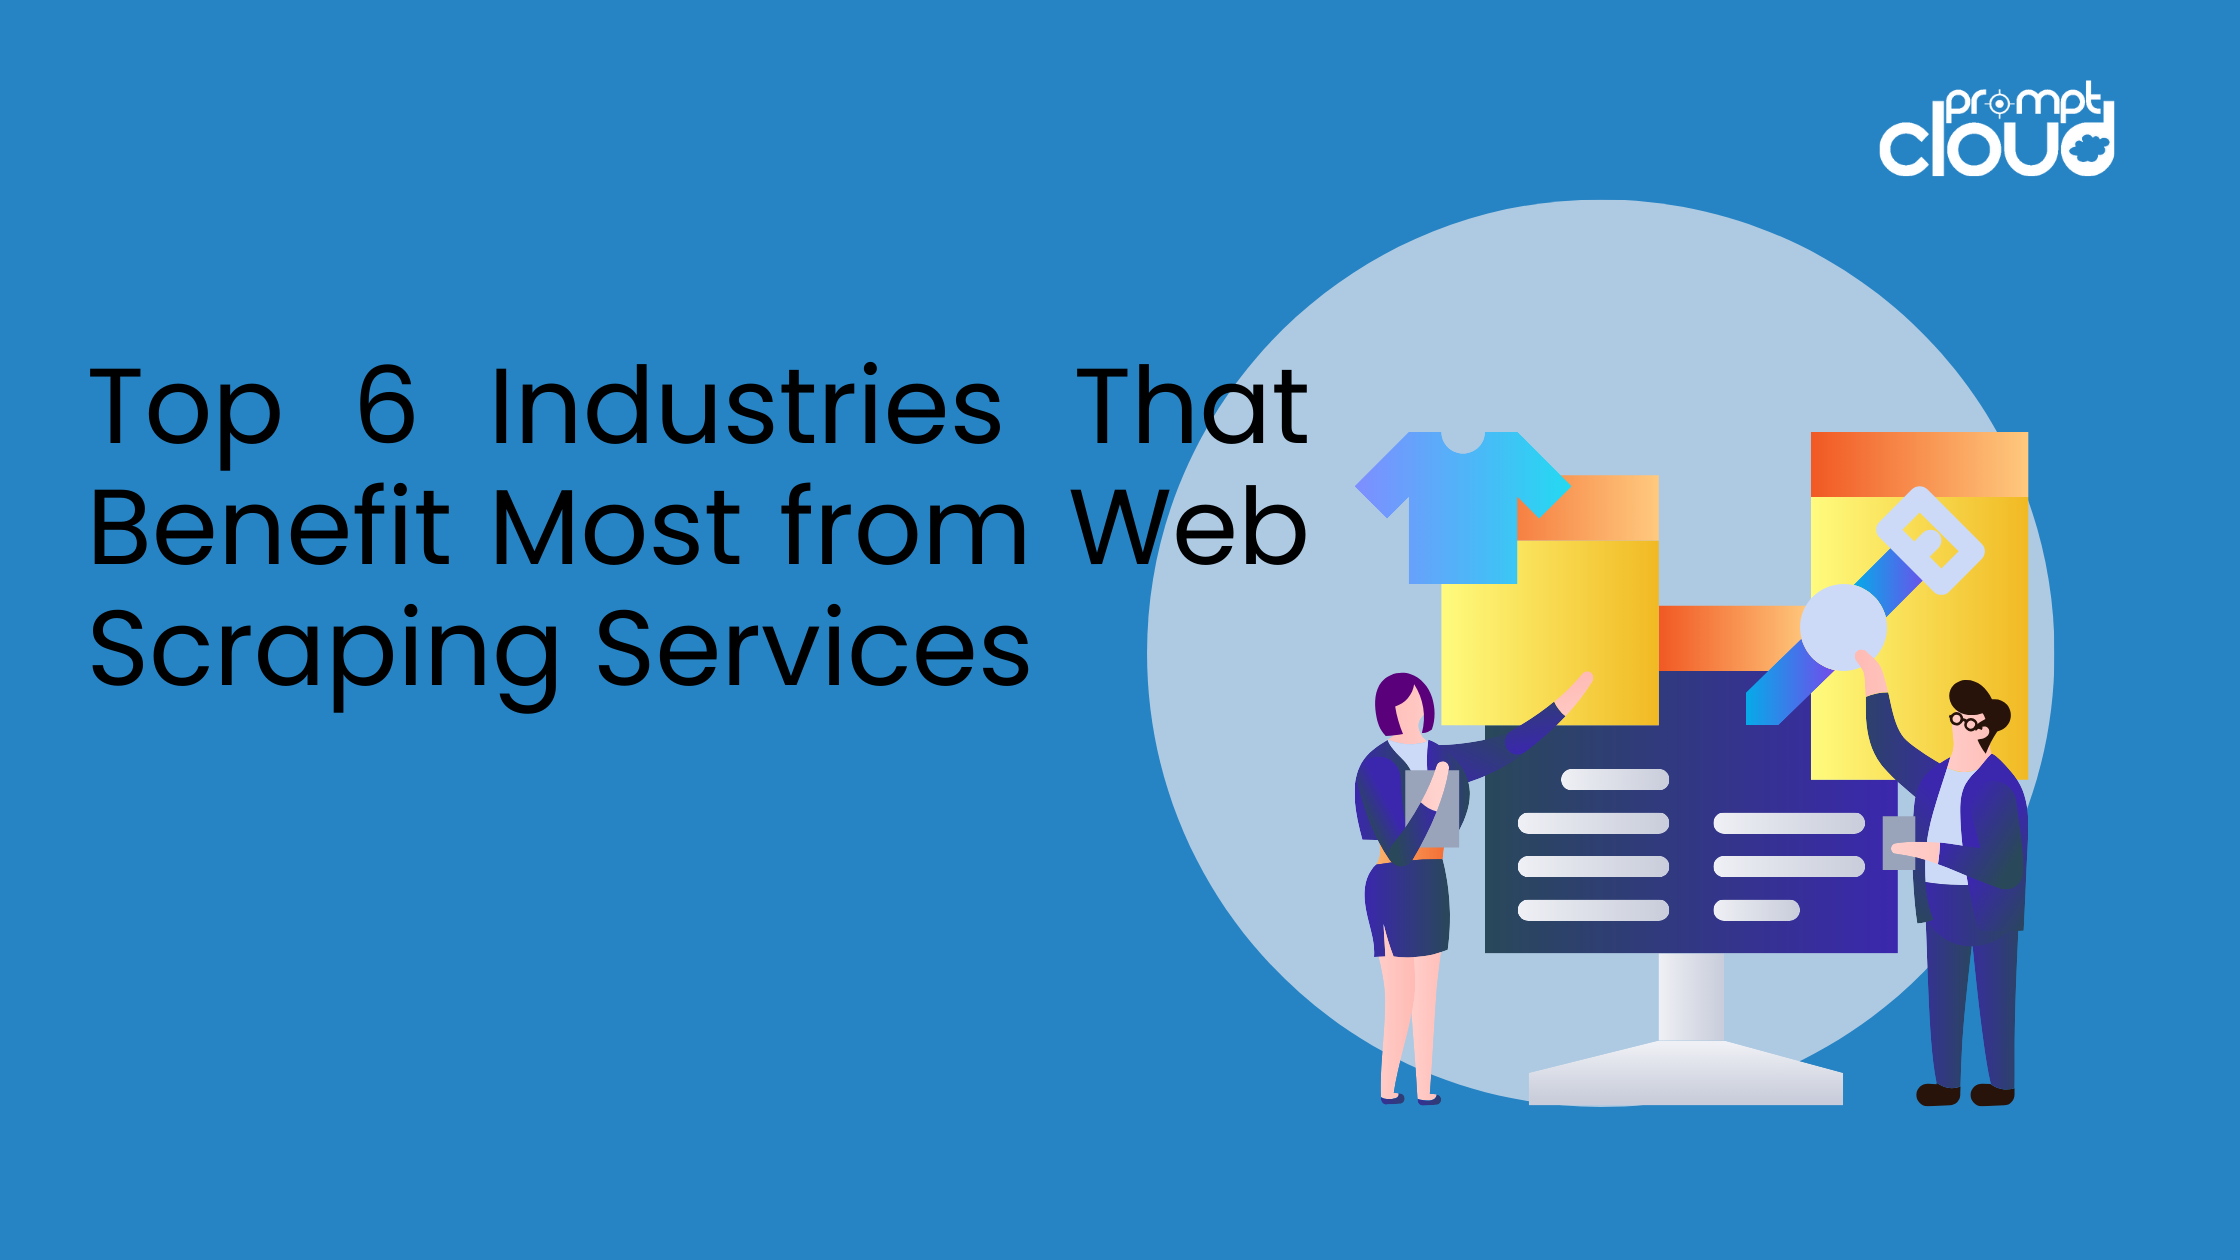 Top 6 Industries That Benefit Most from Web Scraping Services